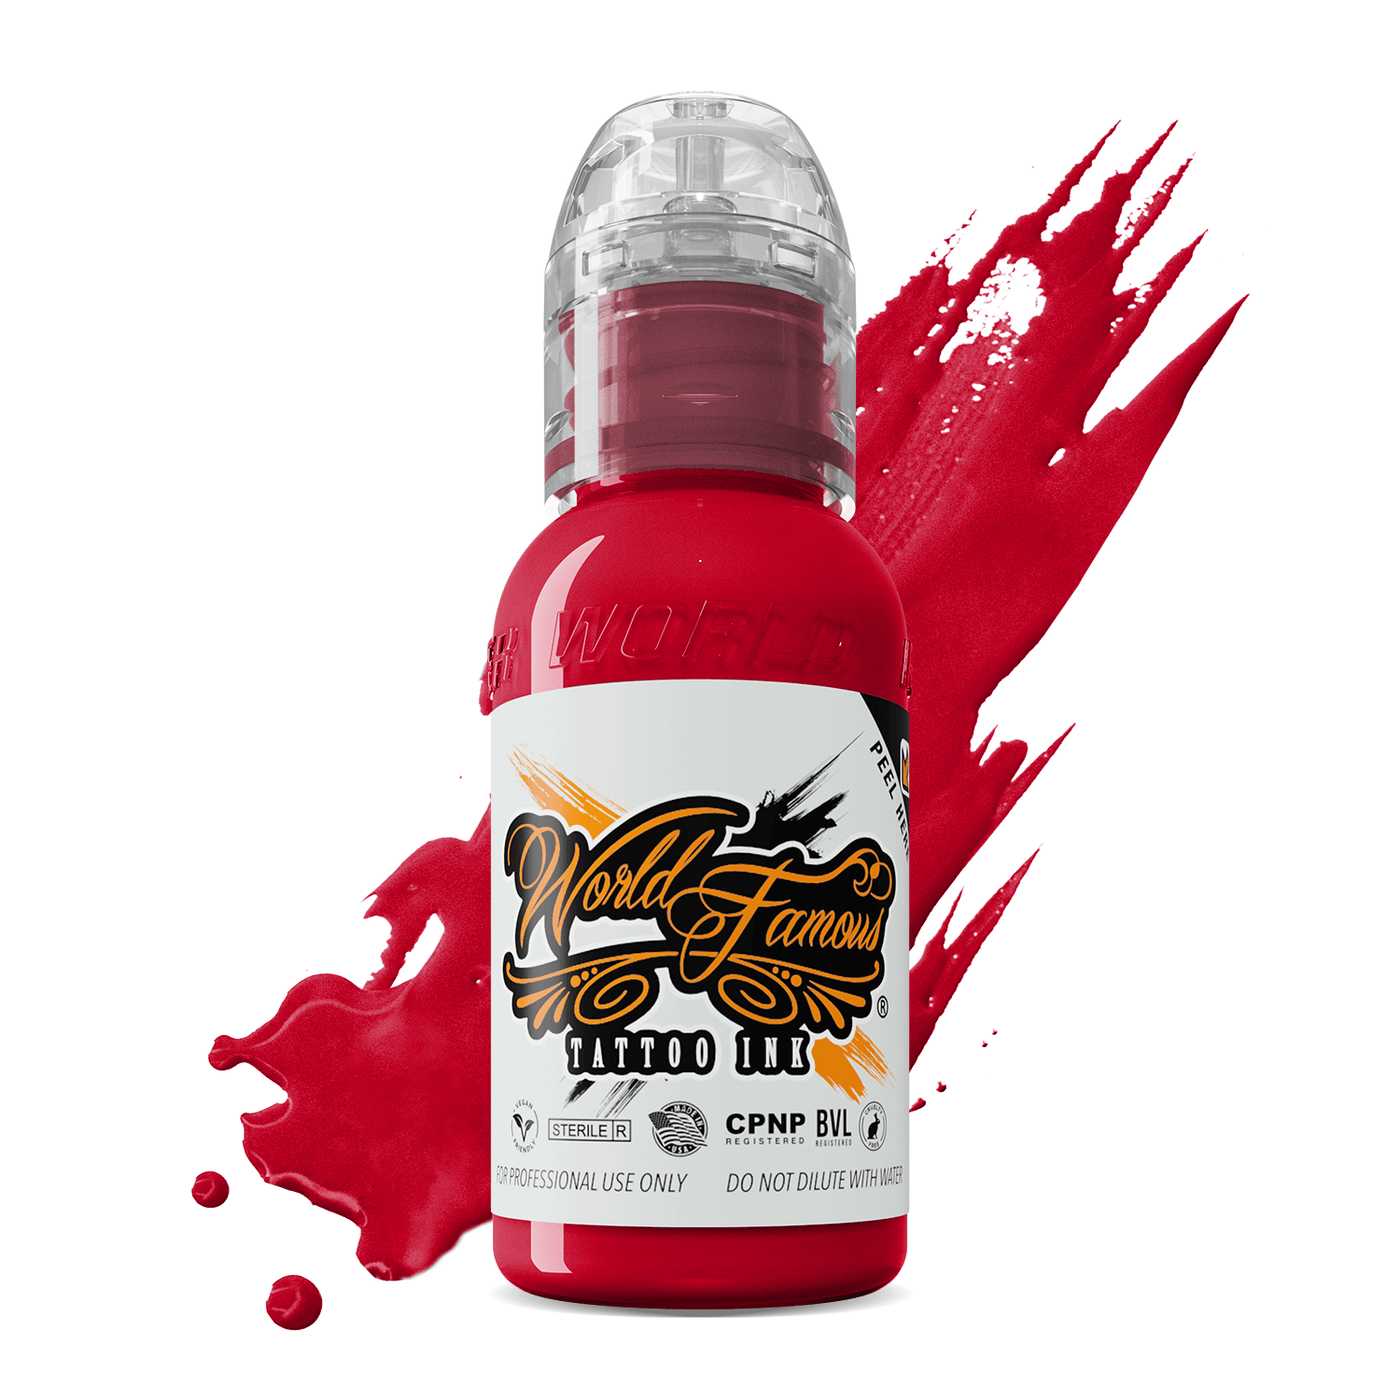 World Famous United Ink Red - Tattoo Ink - Mithra Tattoo Supplies Canada